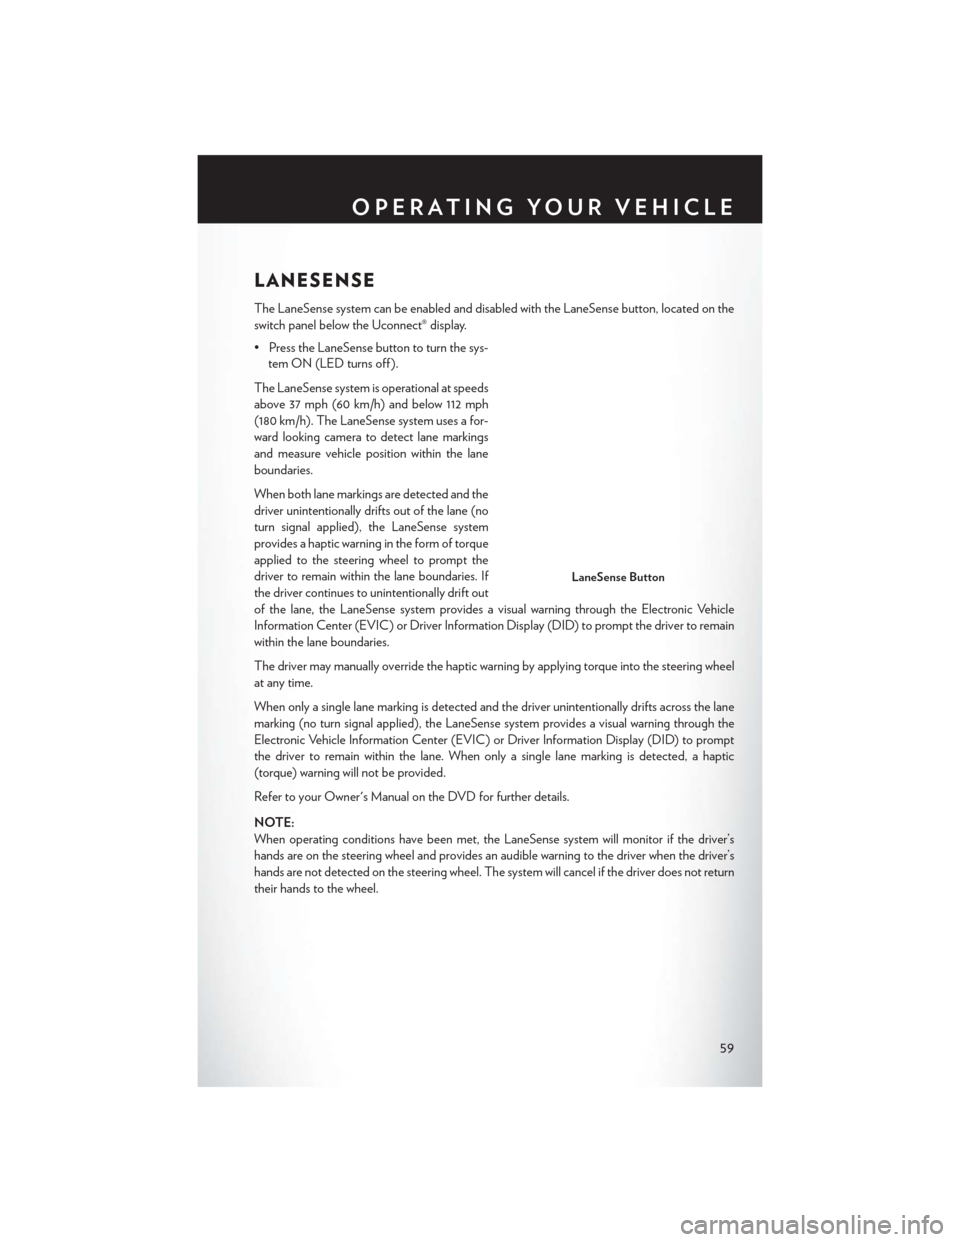 CHRYSLER 200 2015 2.G Repair Manual LANESENSE
The LaneSense system can be enabled and disabled with the LaneSense button, located on the
switch panel below the Uconnect® display.
• Press the LaneSense button to turn the sys-tem ON (L